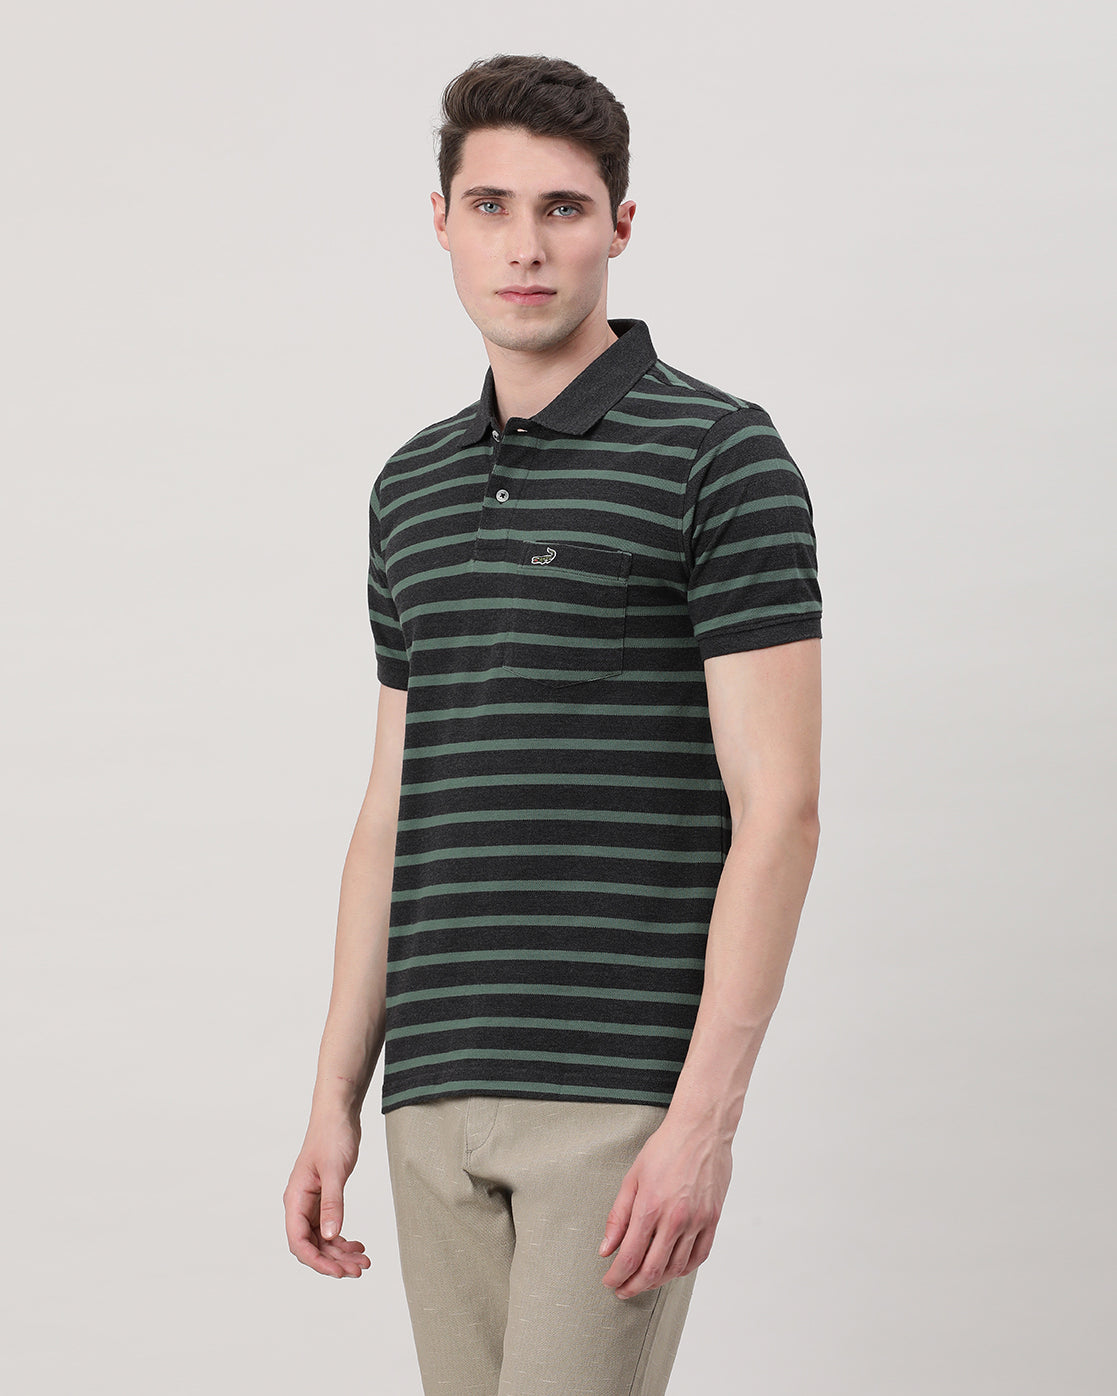 Casual Green T-Shirt Striper Half Sleeve Slim Fit with Collar